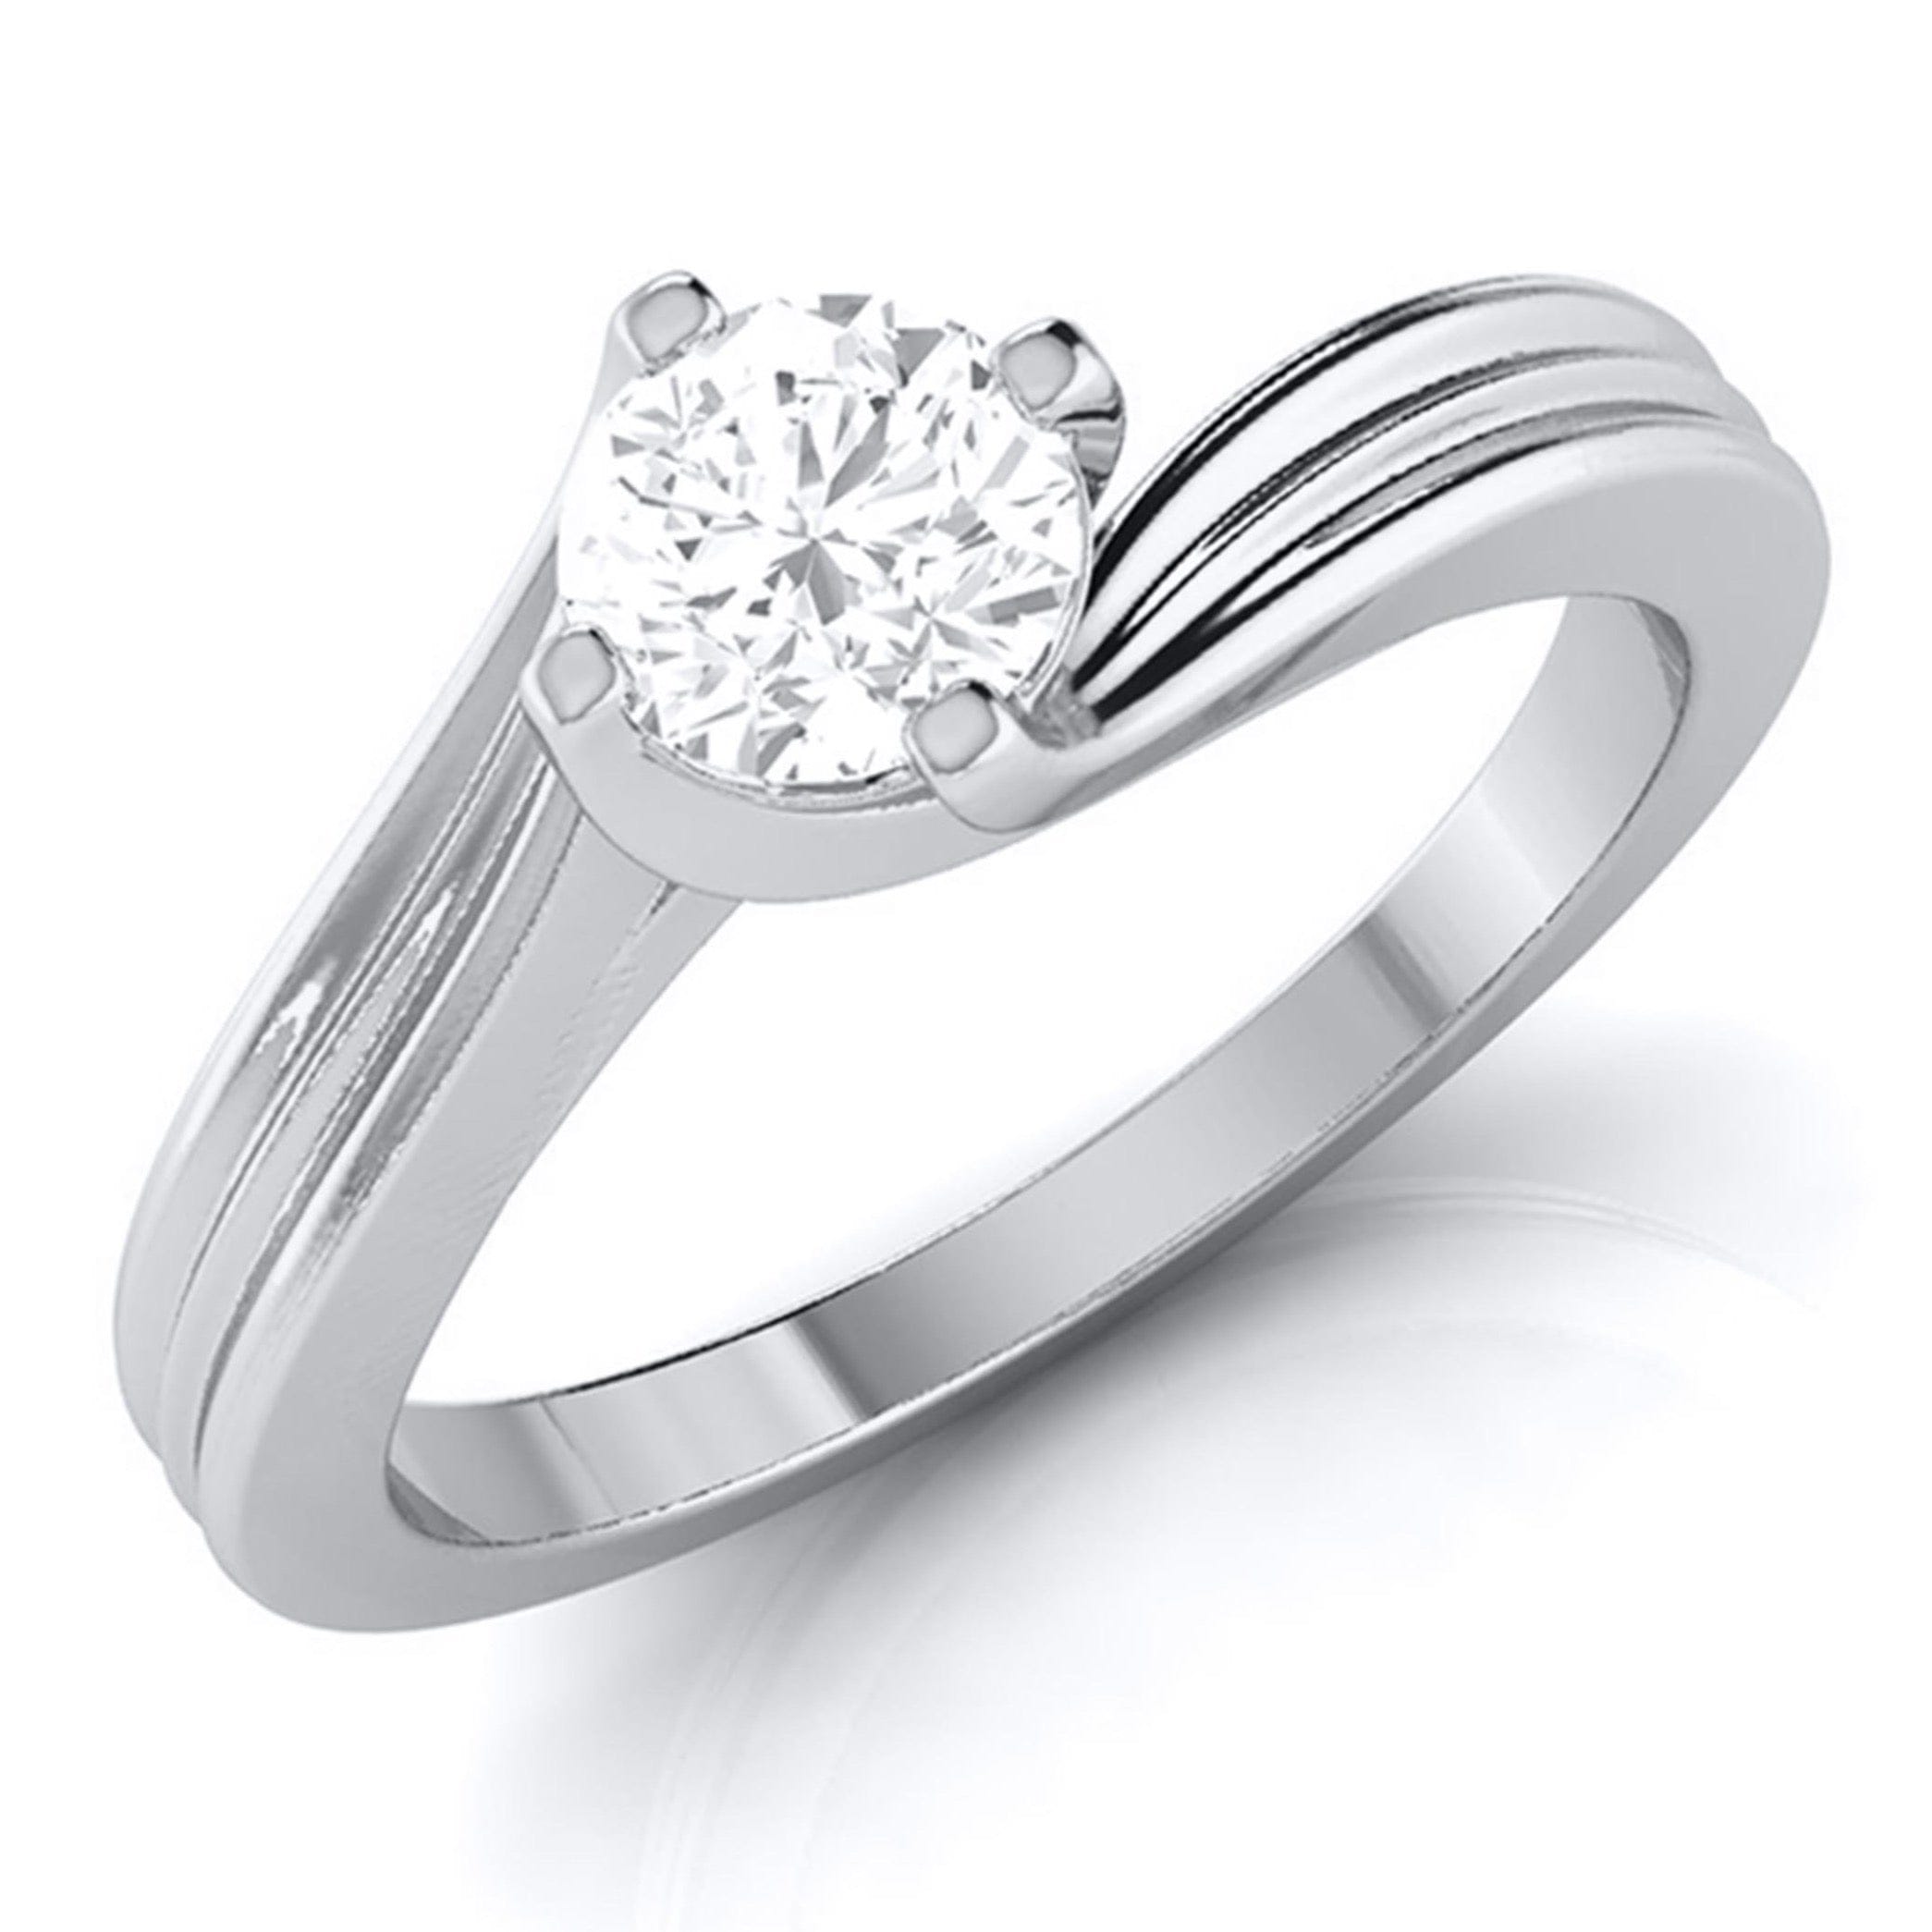 Build Your Own Engagement Ring® - Settings | Blue Nile